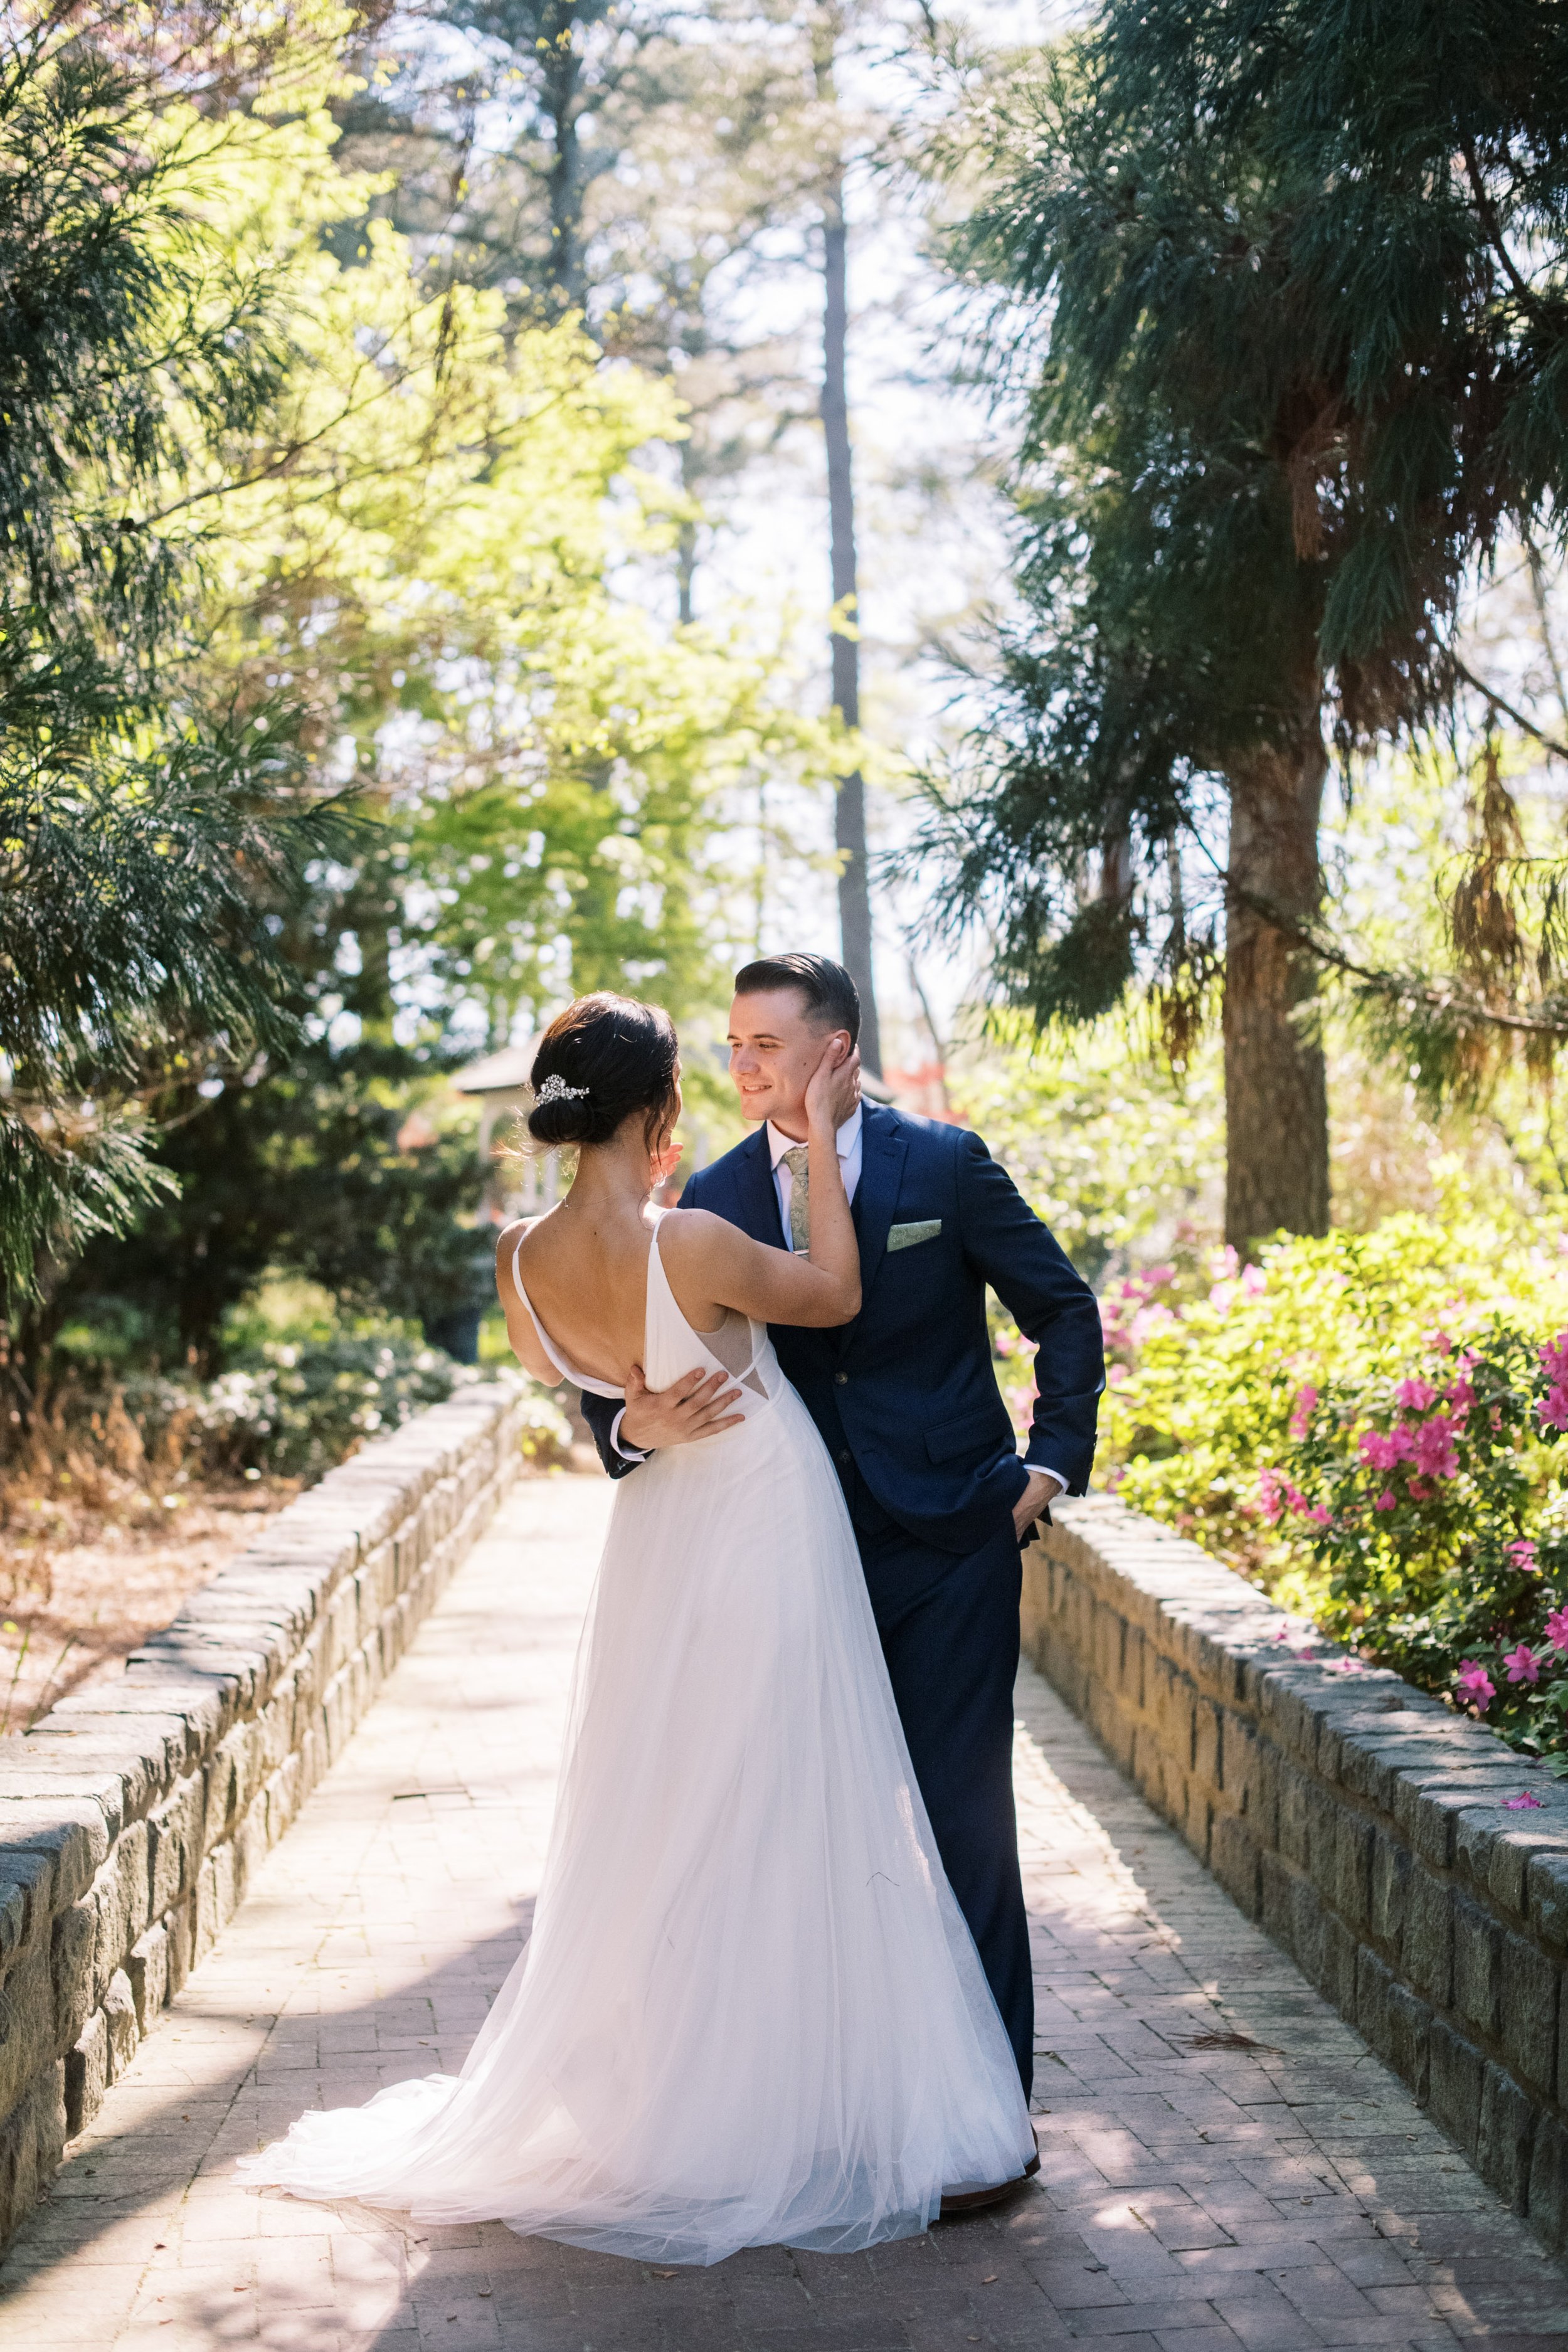 Bride Groom Dip in Pathway Cape Fear Botanical Garden Wedding Fancy This Photography